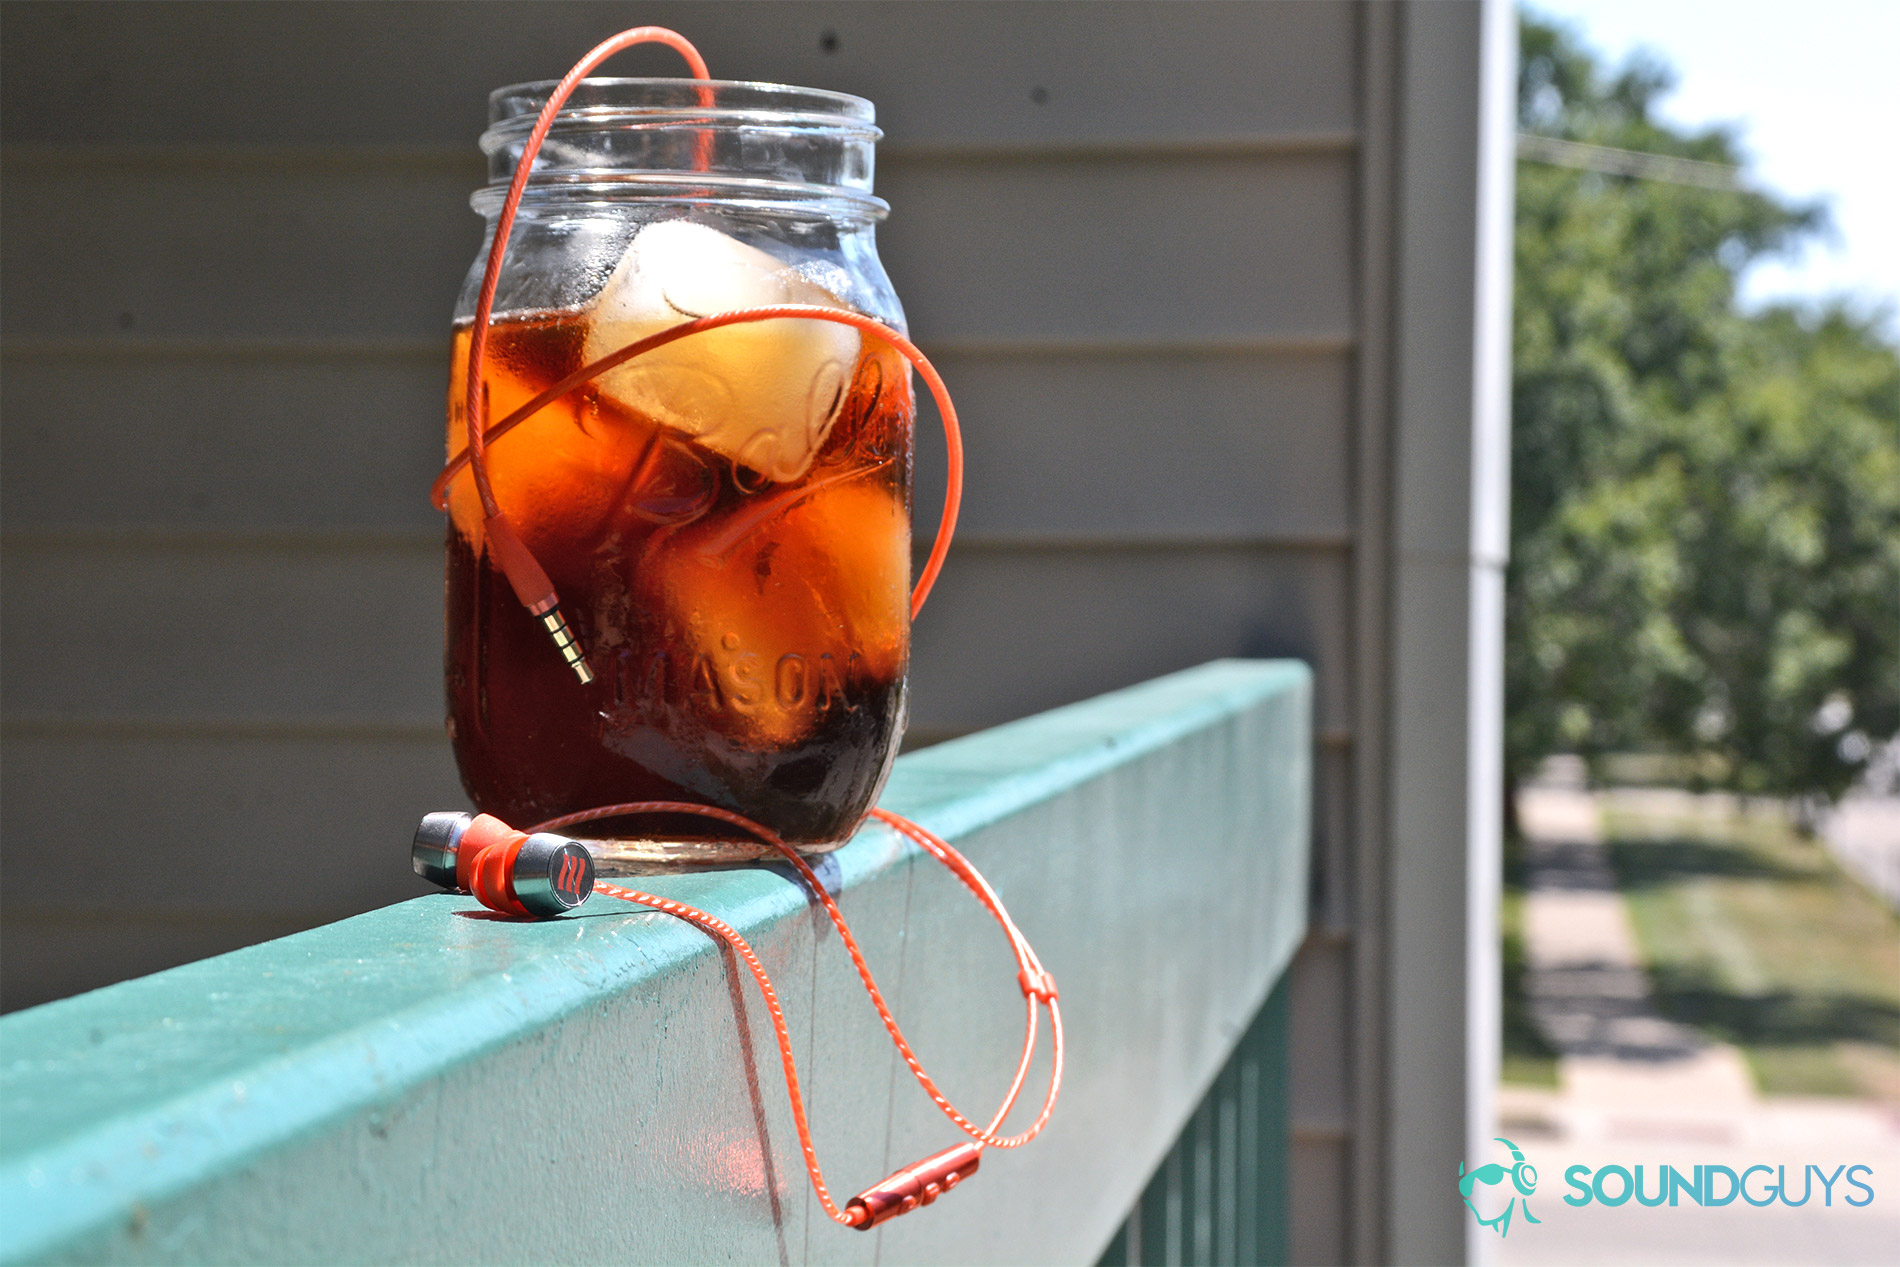 A photo of the Echobox Traveler in-ears on a railing, flaked by an iced coffee.